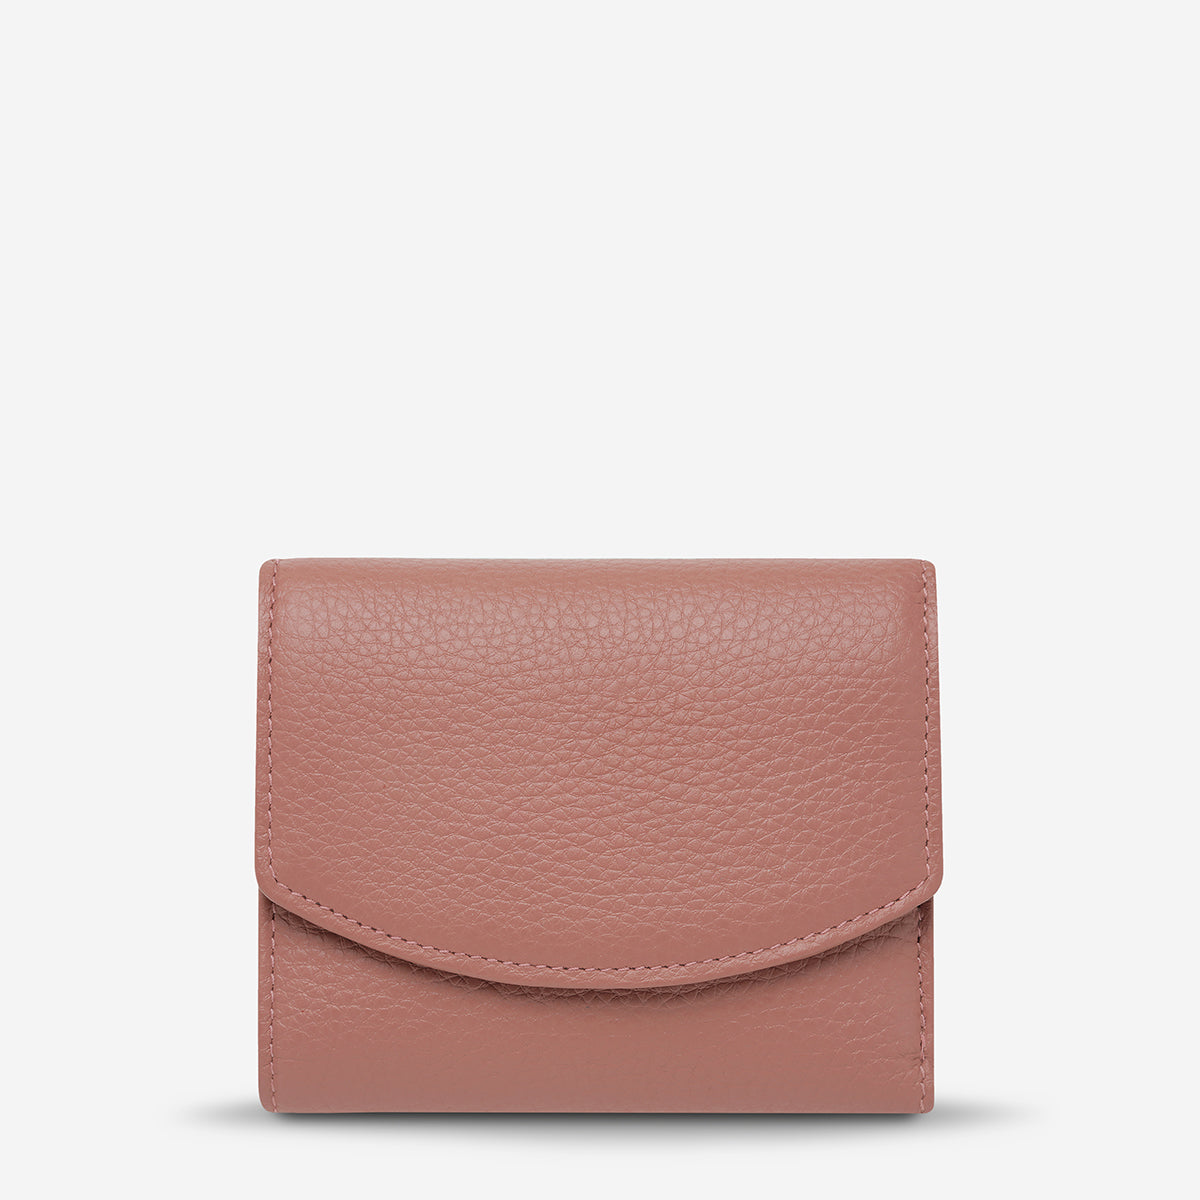 Status Anxiety Lucky Sometimes Women's Leather Wallet Dusty Rose